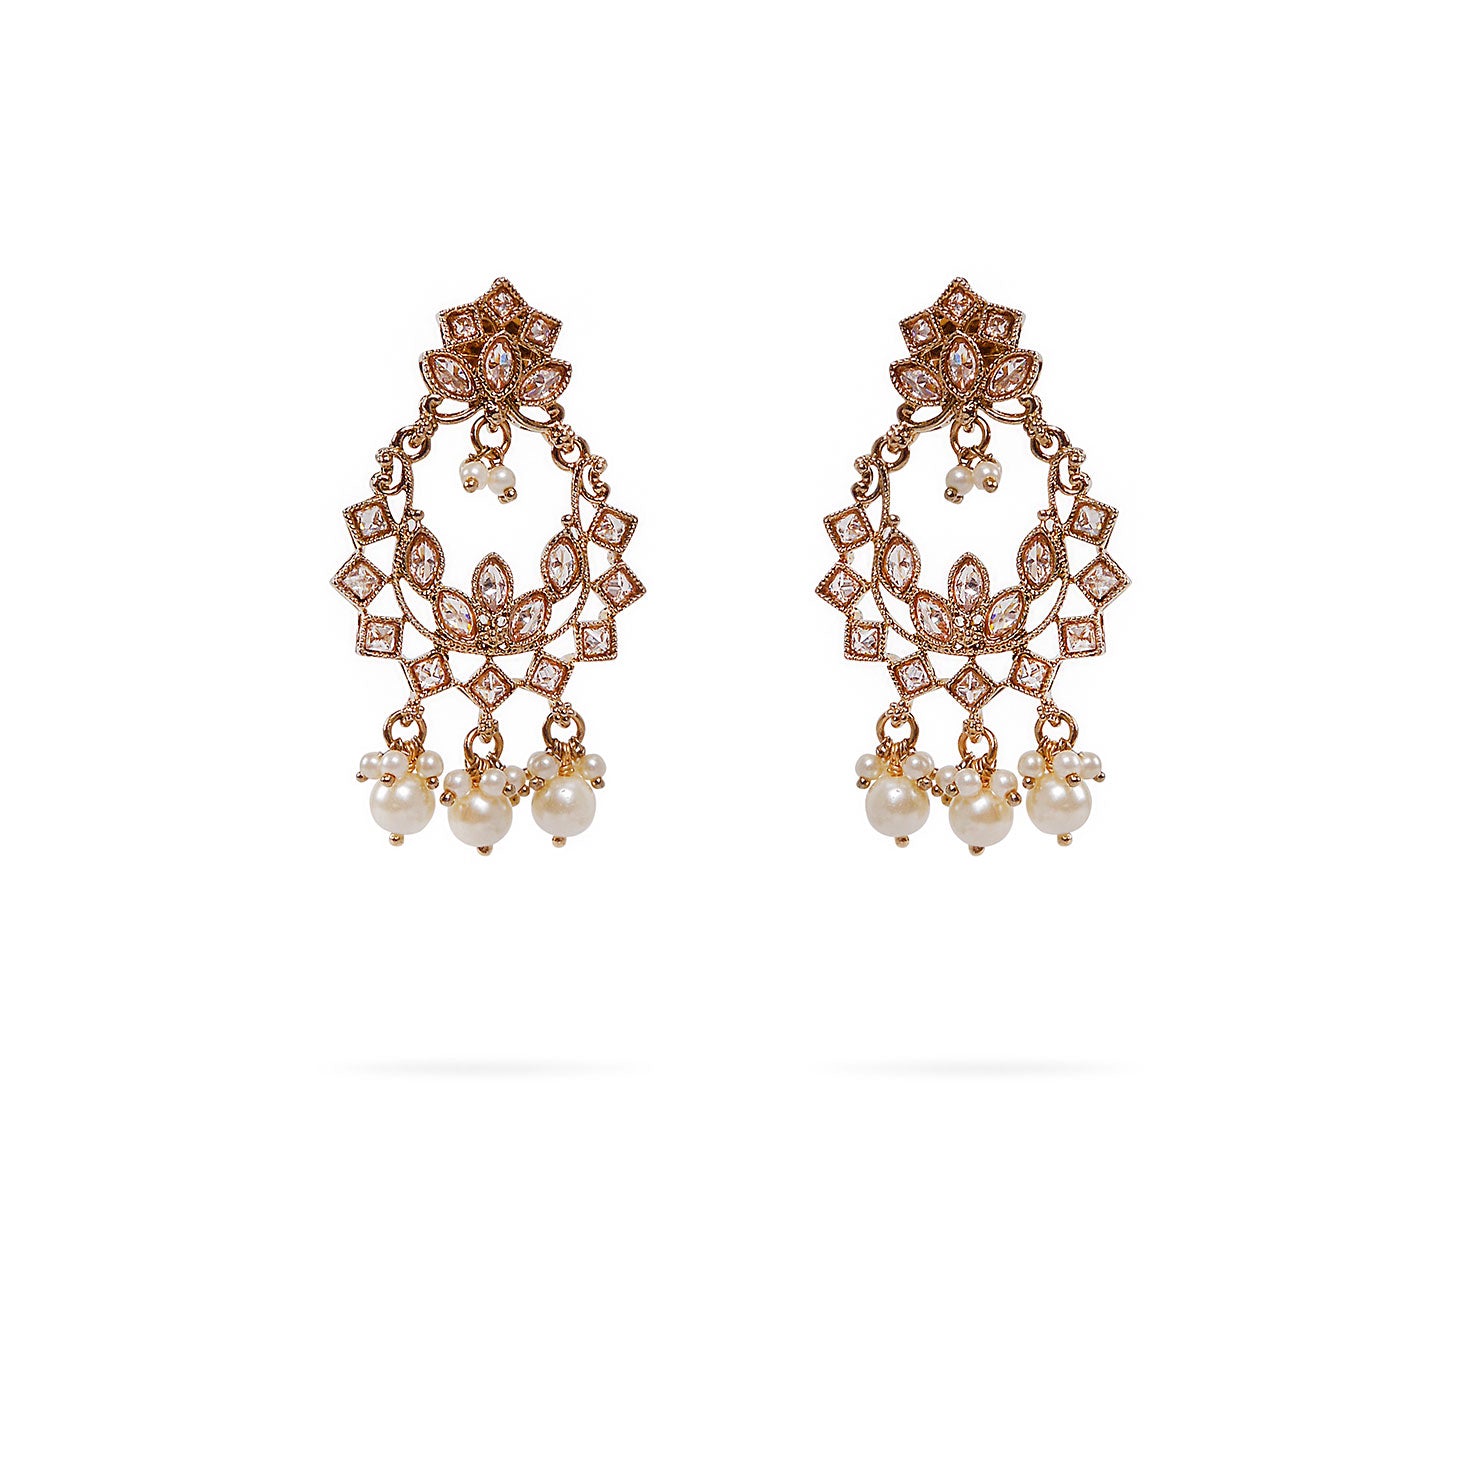 Small Pearl Drop Earrings in Antique Gold